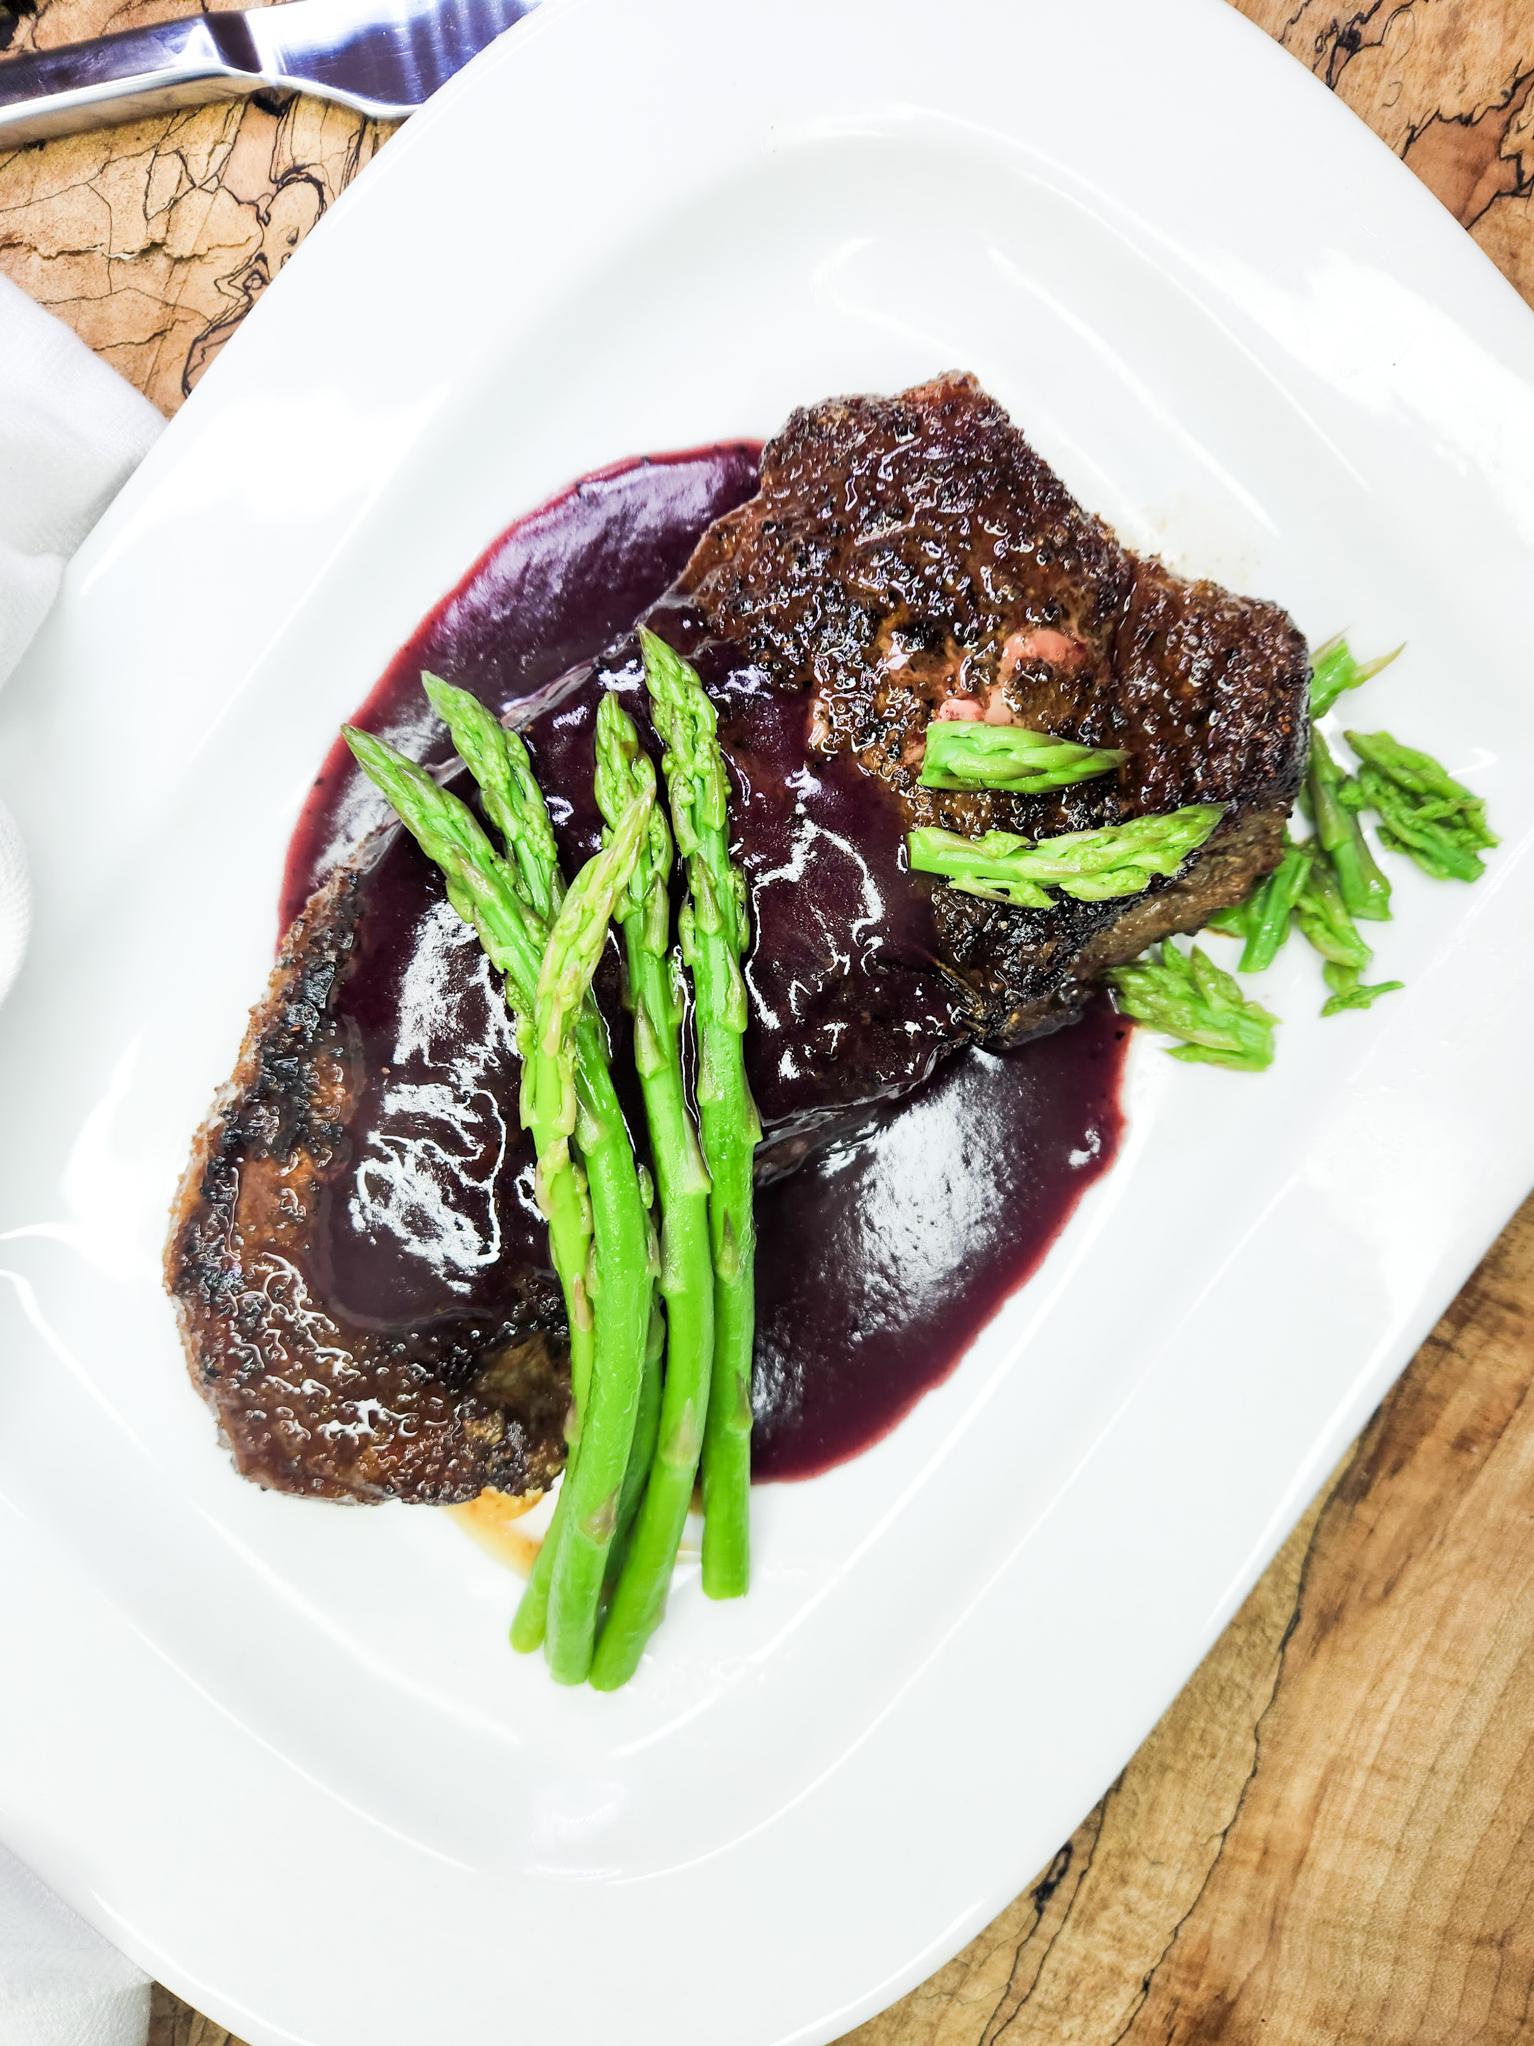  Savor every bite of this luxurious beef dish bathed in a port wine sauce.